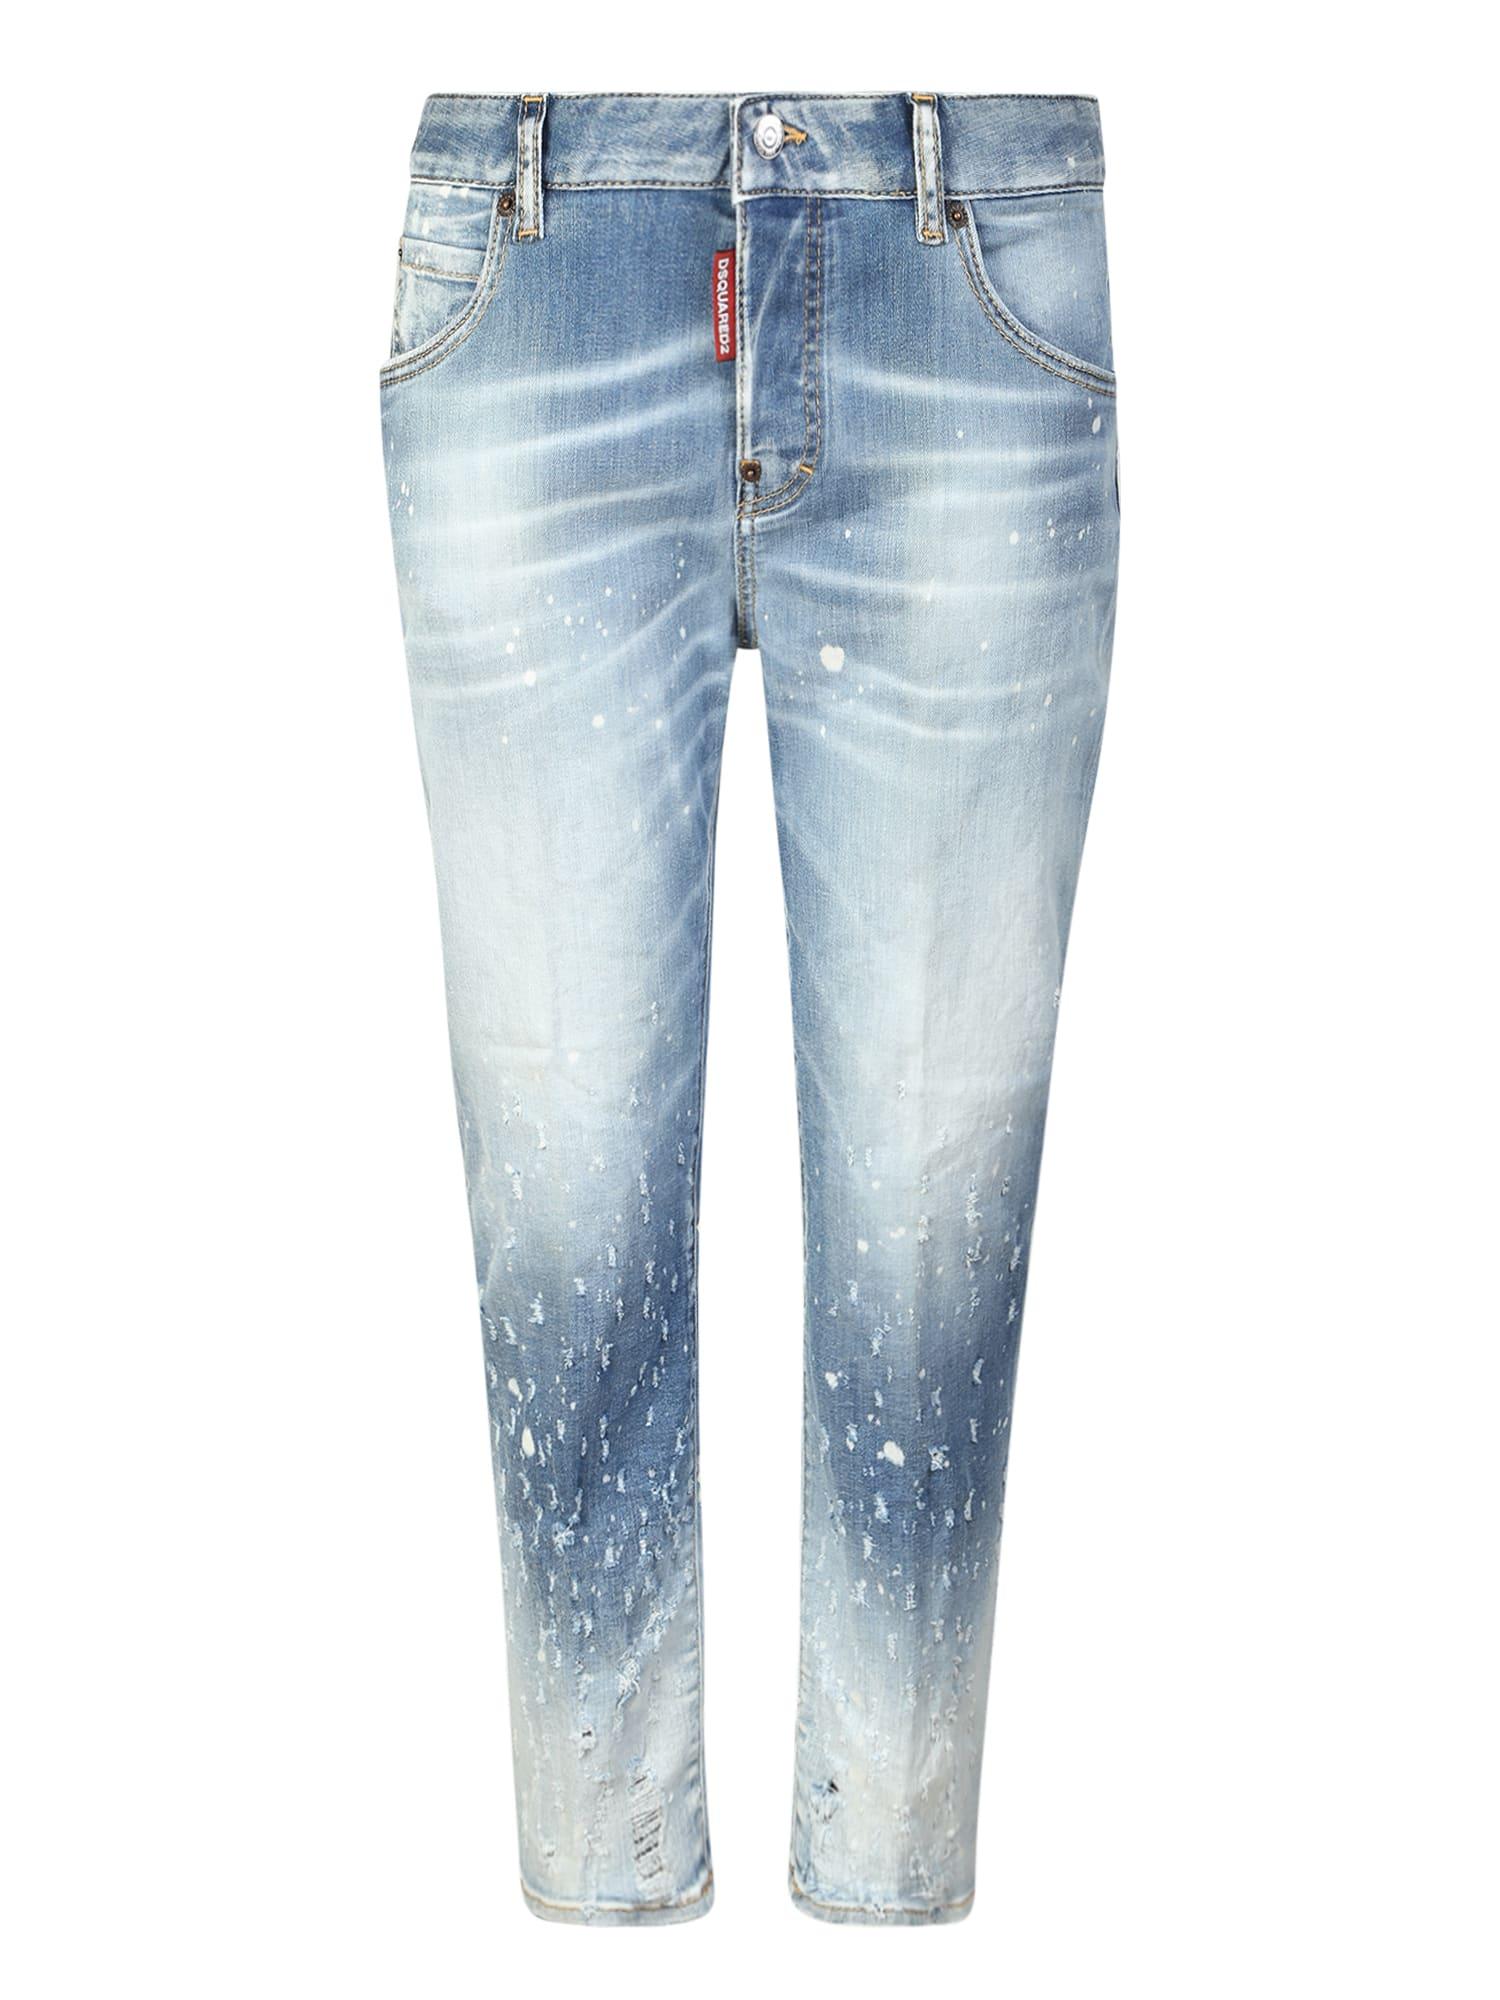 DSquared² Distressed Effect Cropped Skinny Jeans in Blue | Lyst